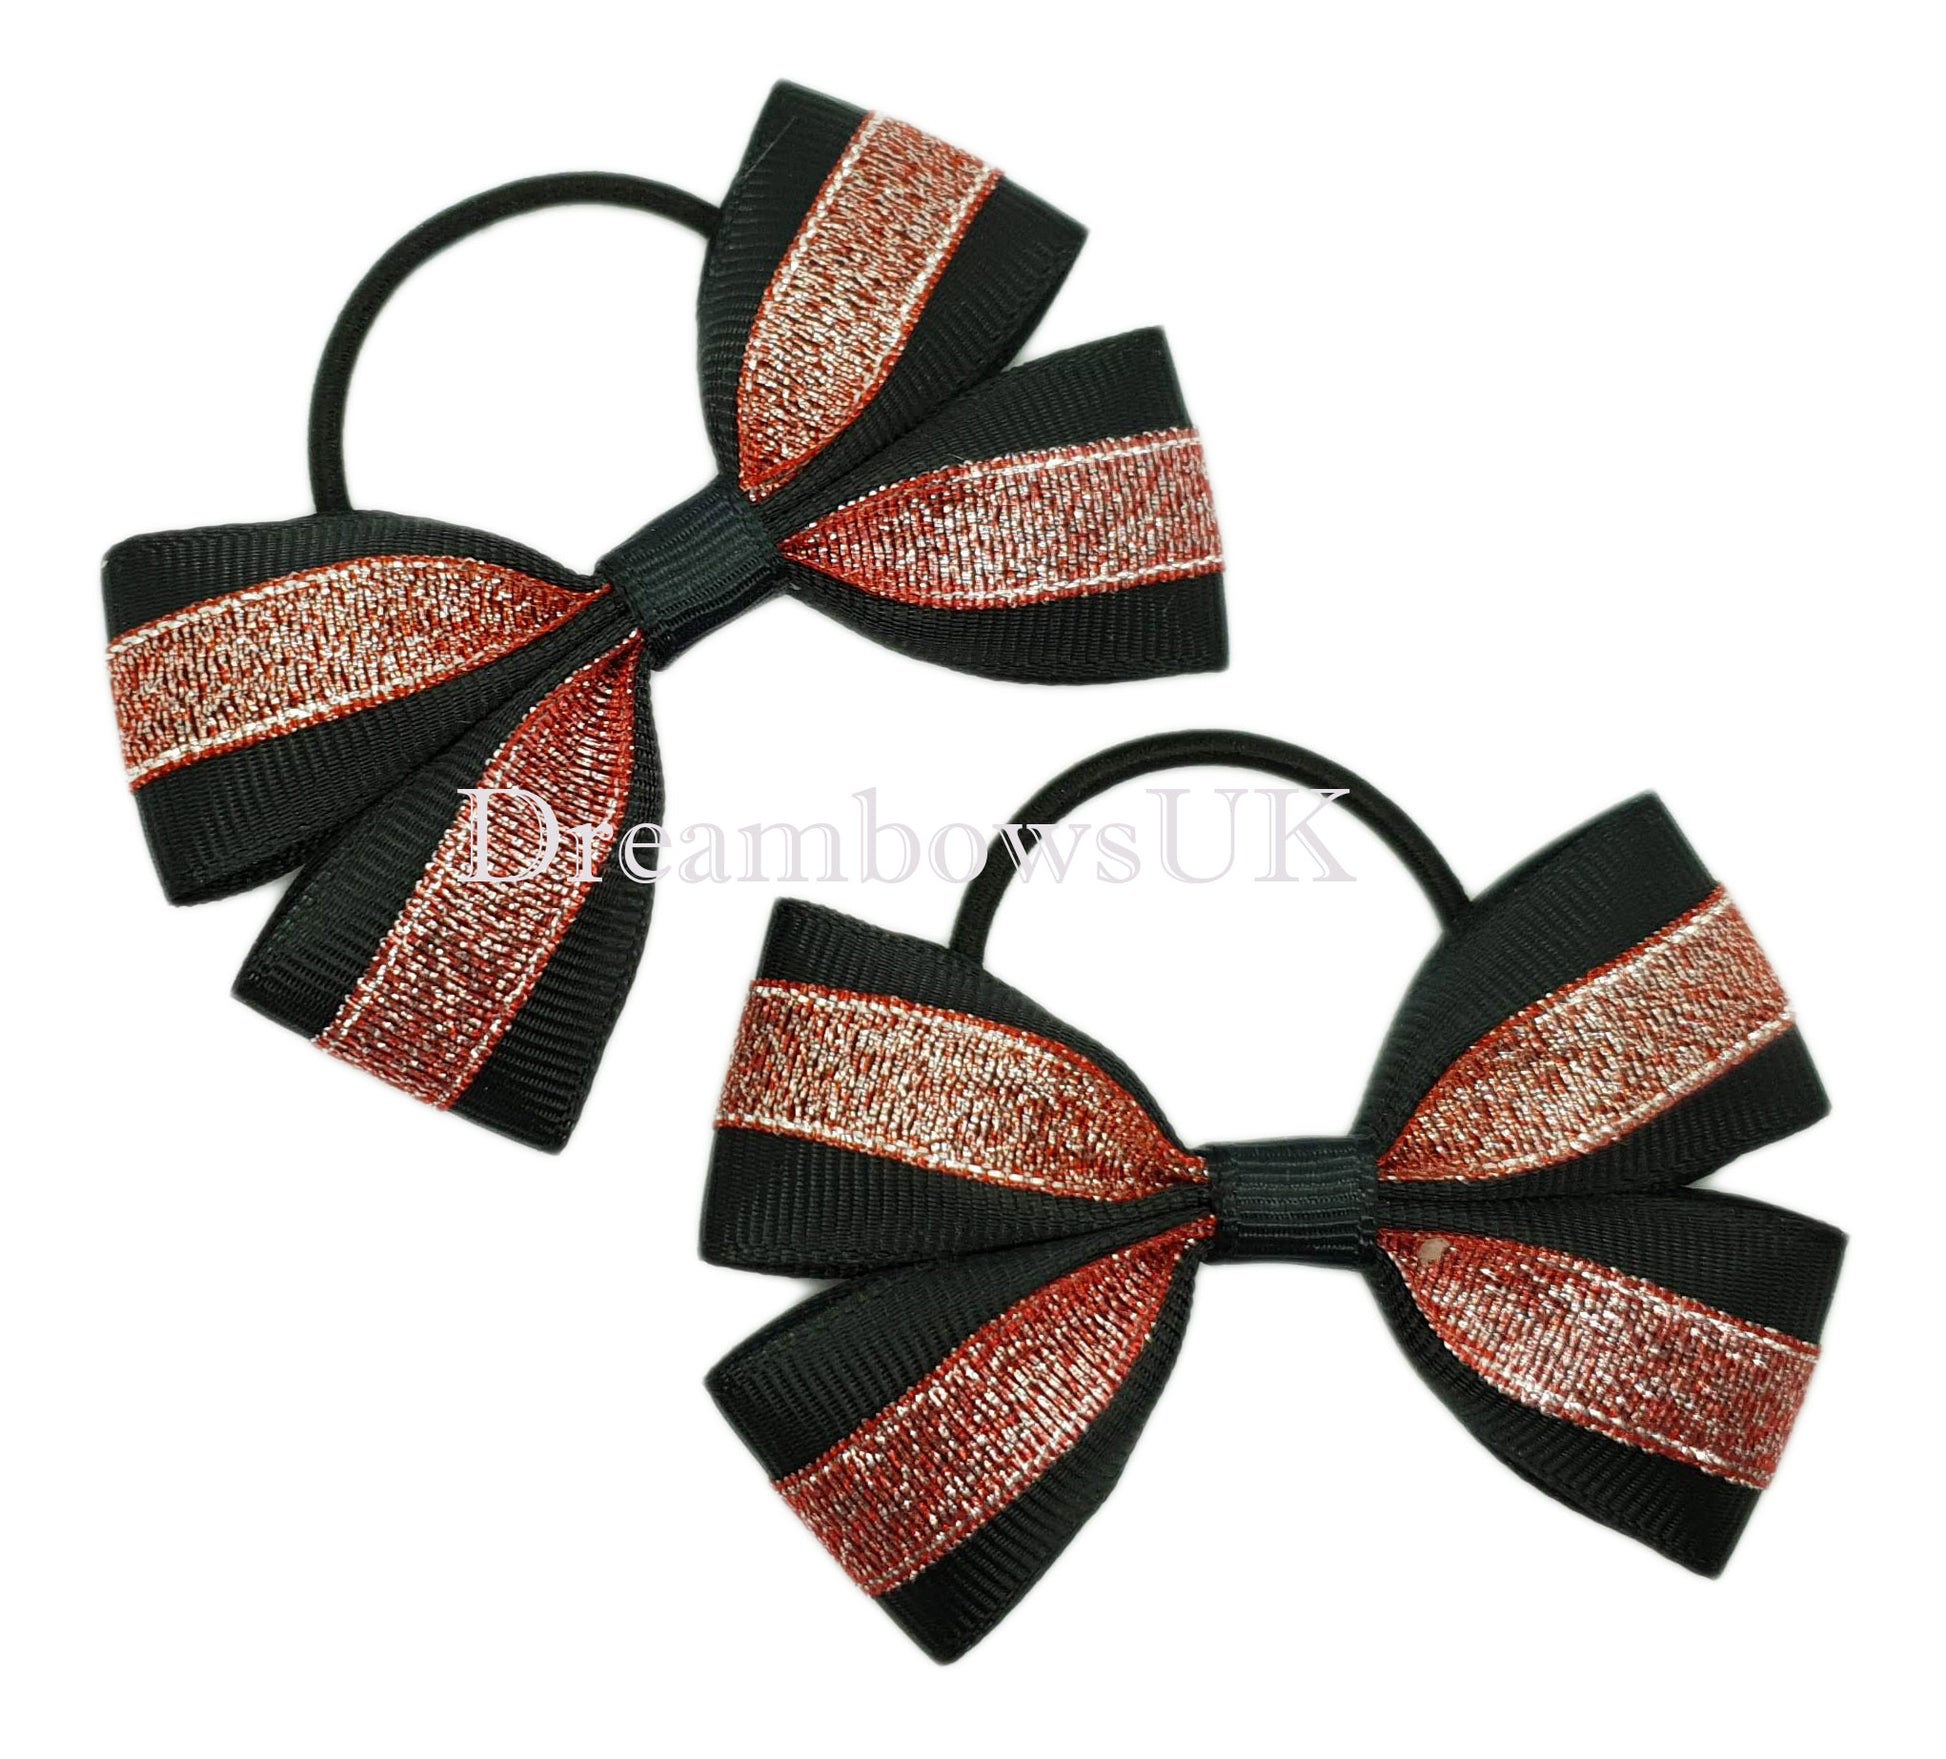 Black and red glitter hair bows on thin bobbles